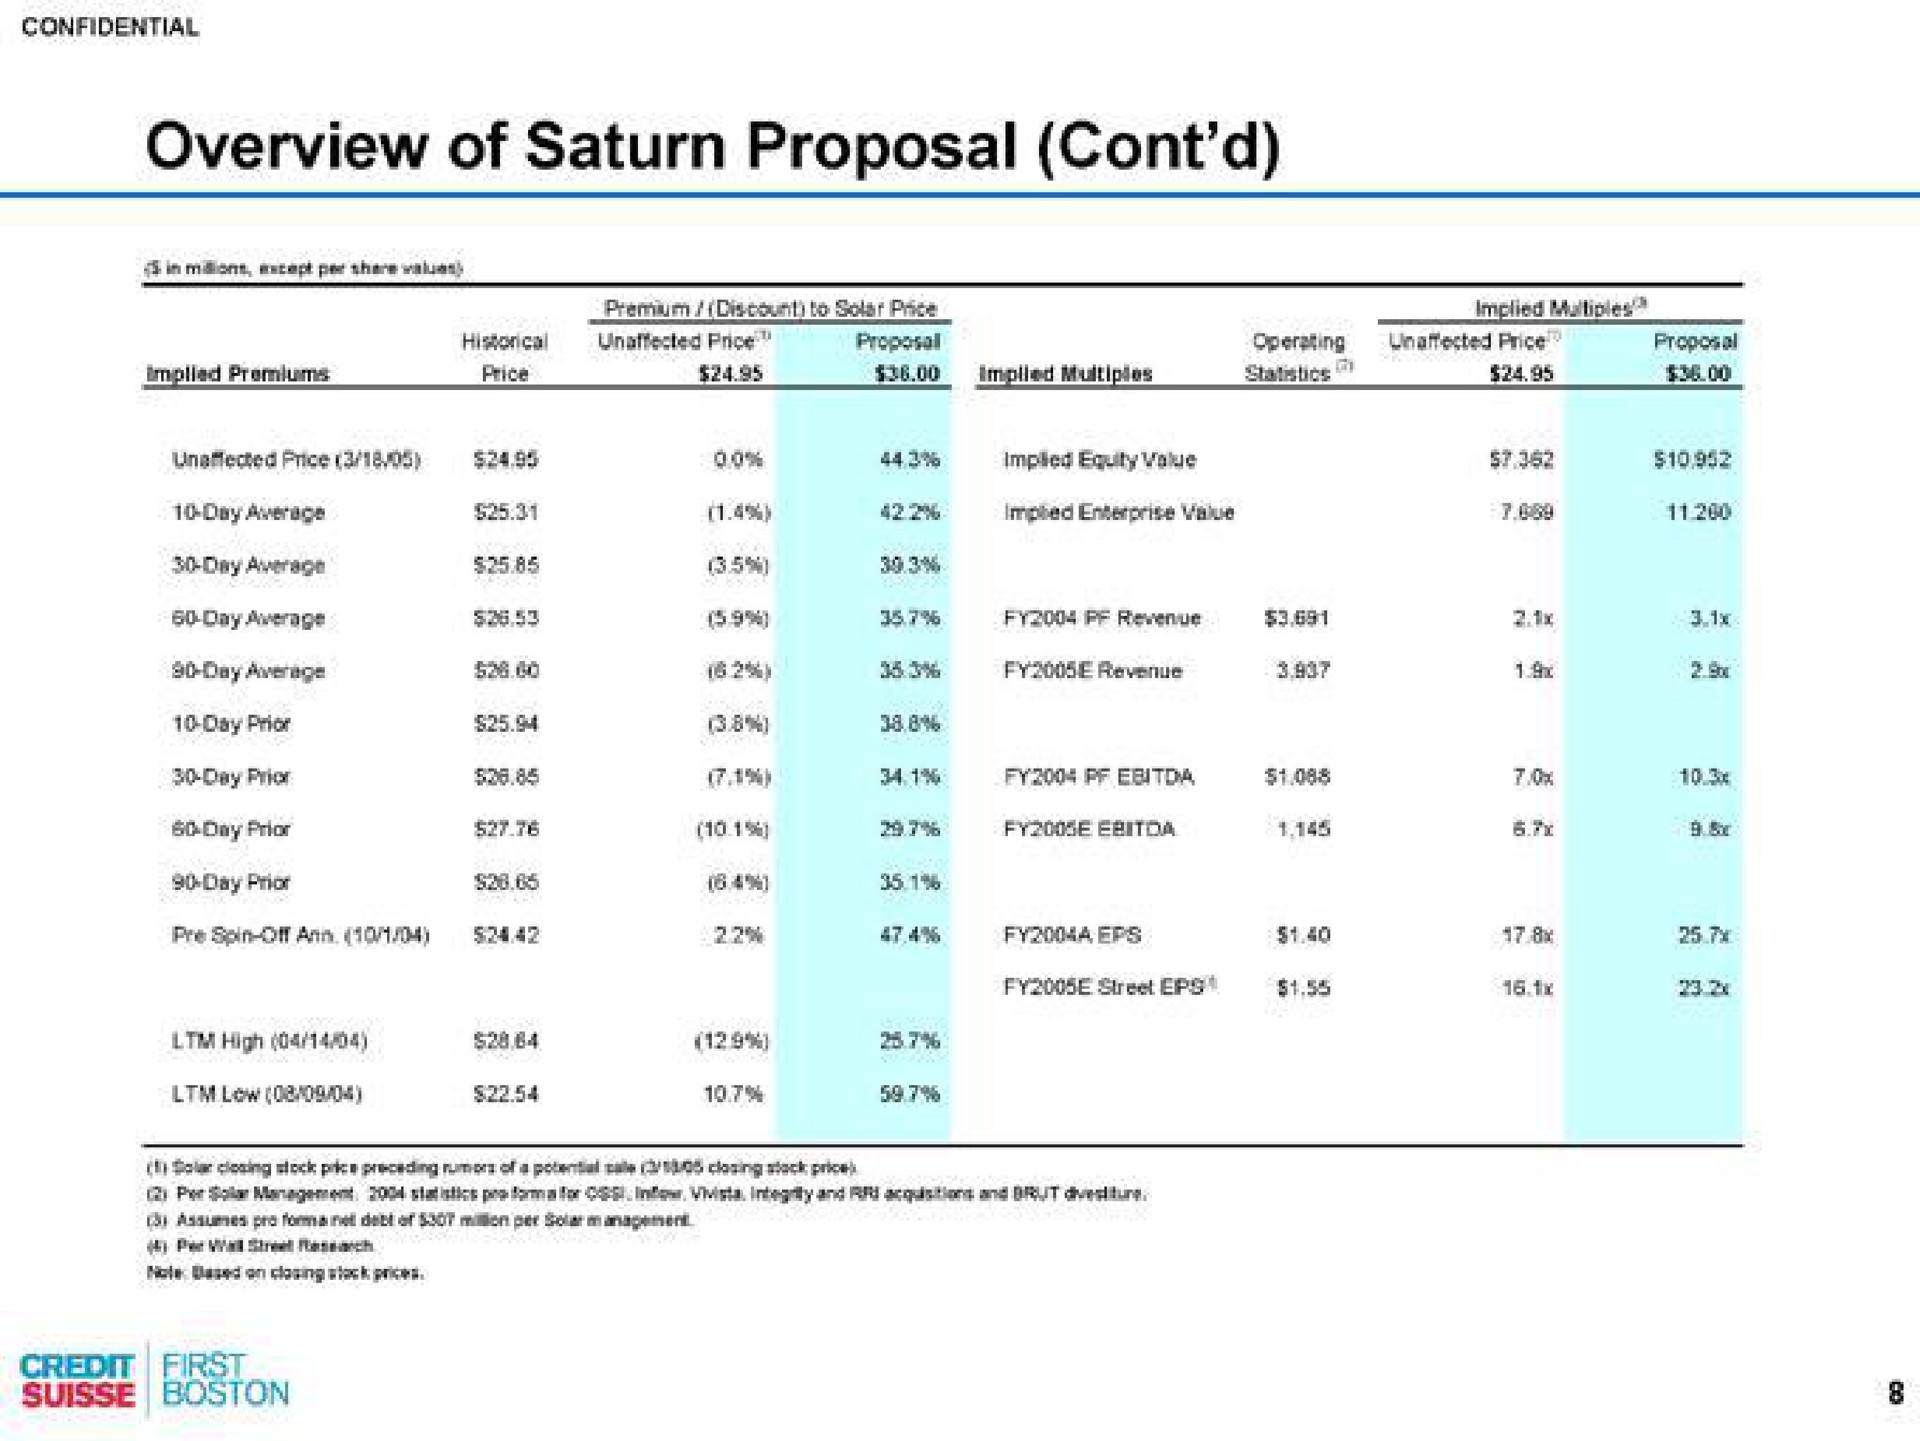 overview of proposal | Credit Suisse